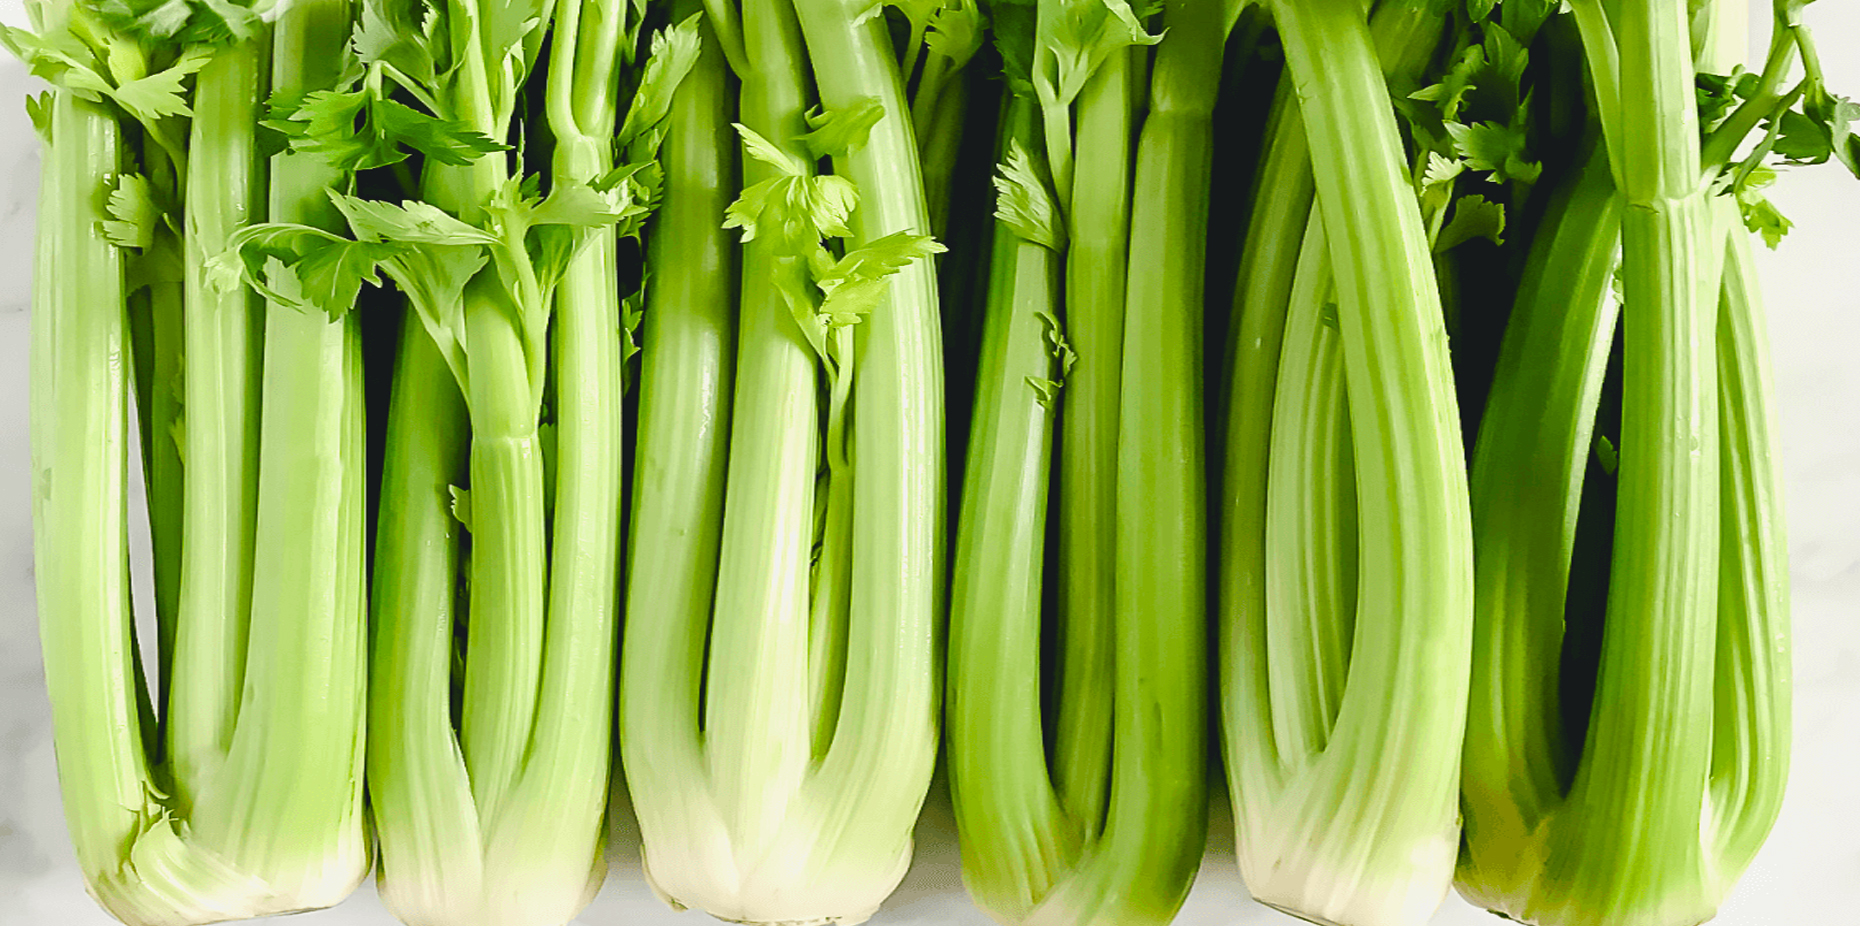 Celery: Facts, Nutrition, Benefits & More